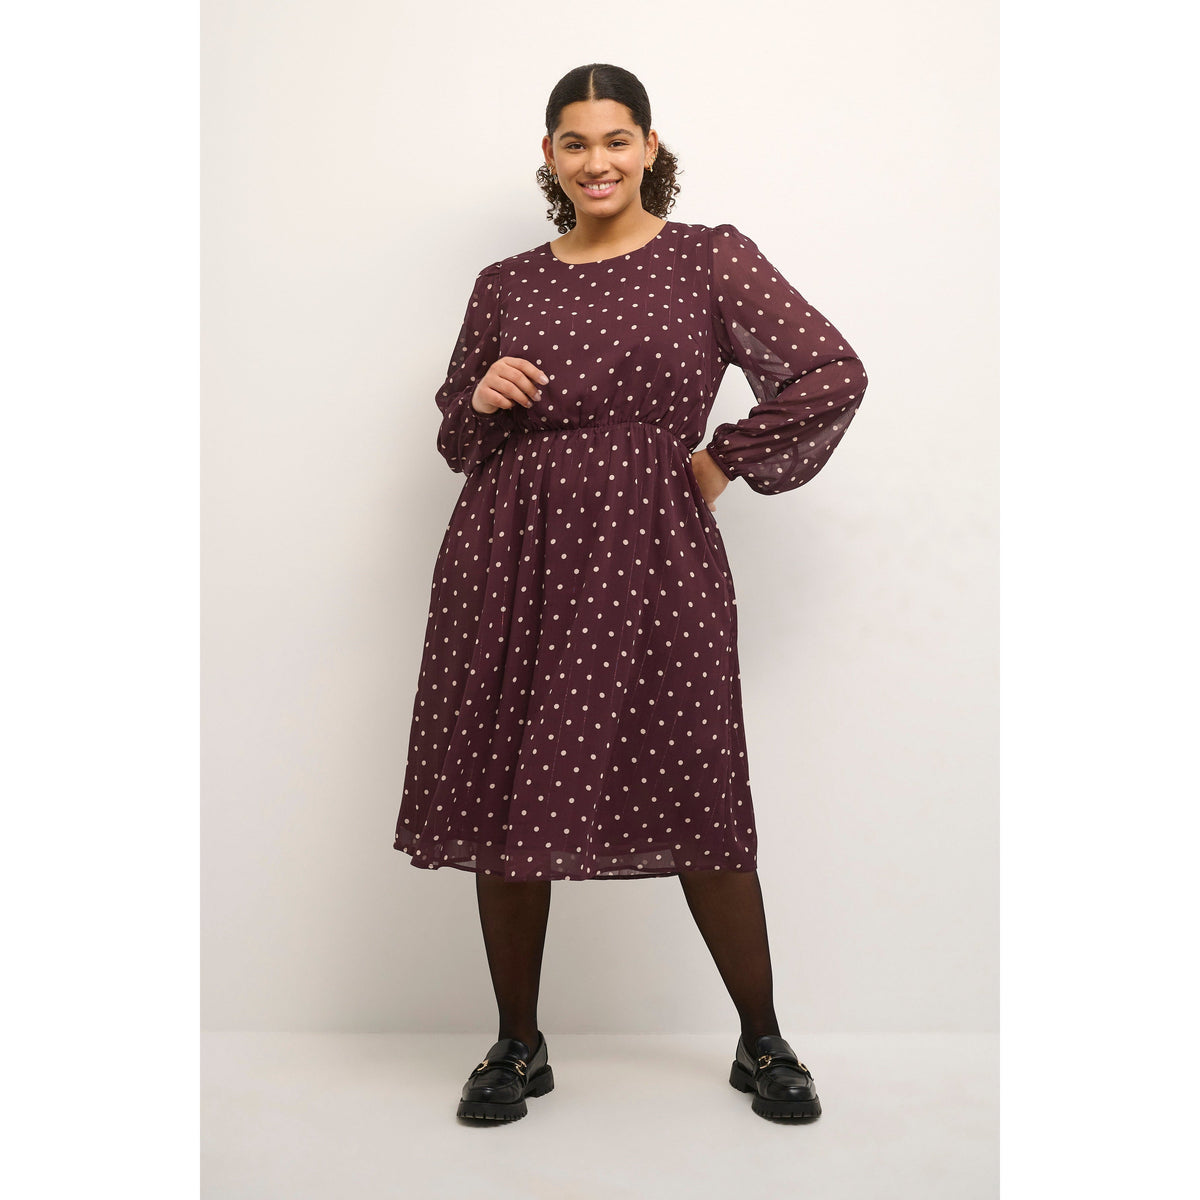 Sinead Curvy Style Clothing for Women